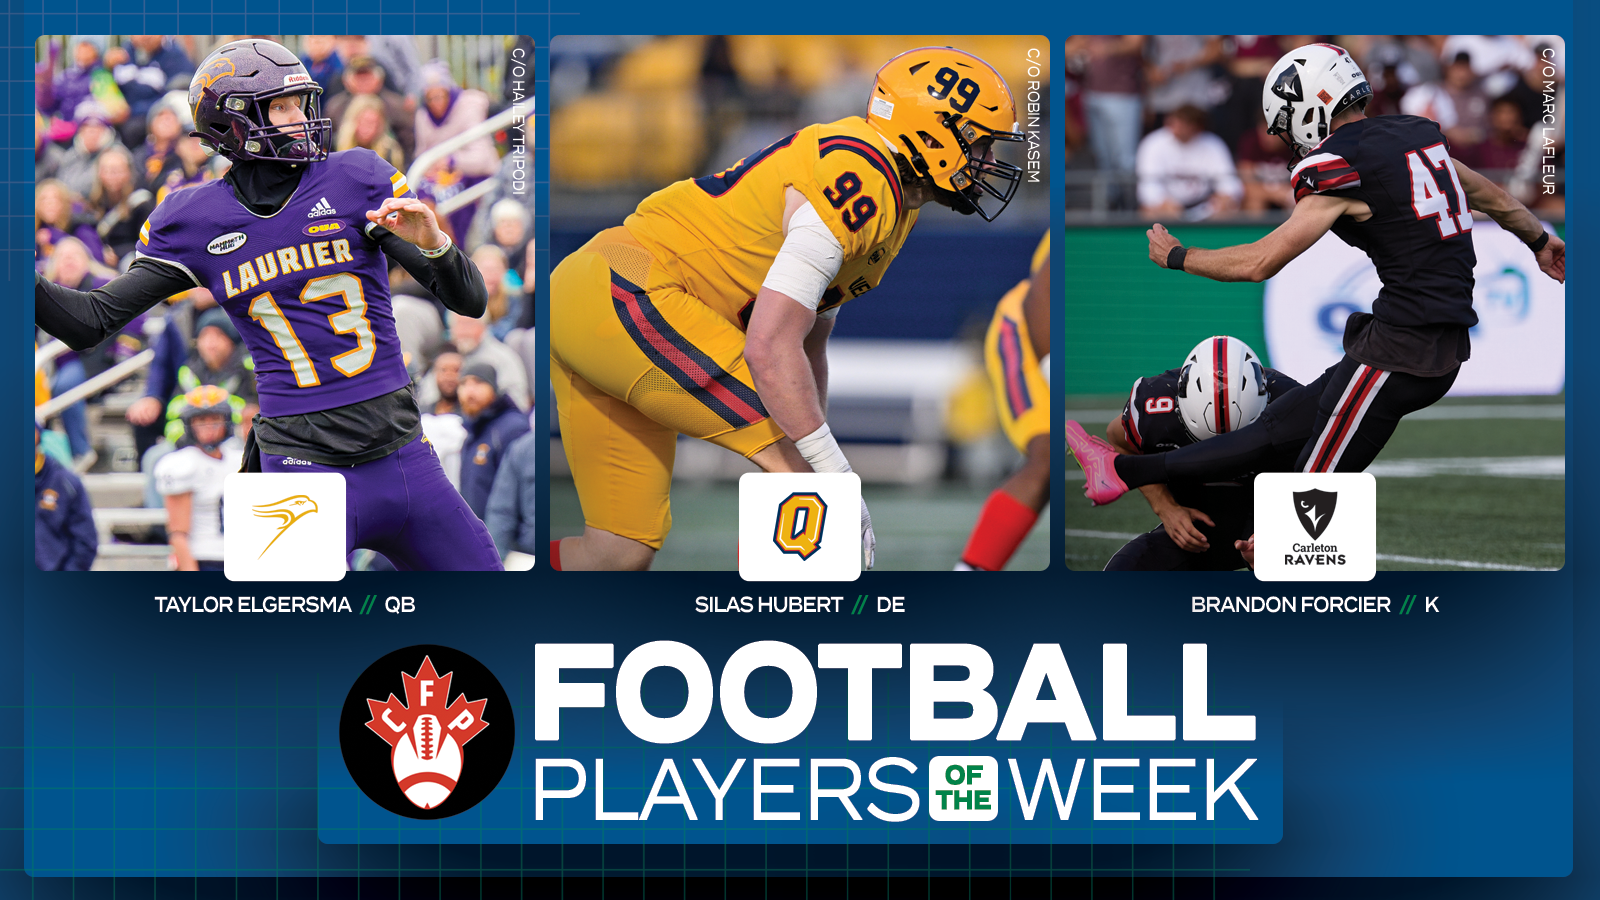 Graphic on predominantly blue background featuring action photos of Taylor Elgersma, Silas Hubert, and Brandon Forcier with their name and school logos placed beneath their respective photos, along with the Canadian Football Perspective logo and white text that reads 'Football Players of the Week' in the lower third